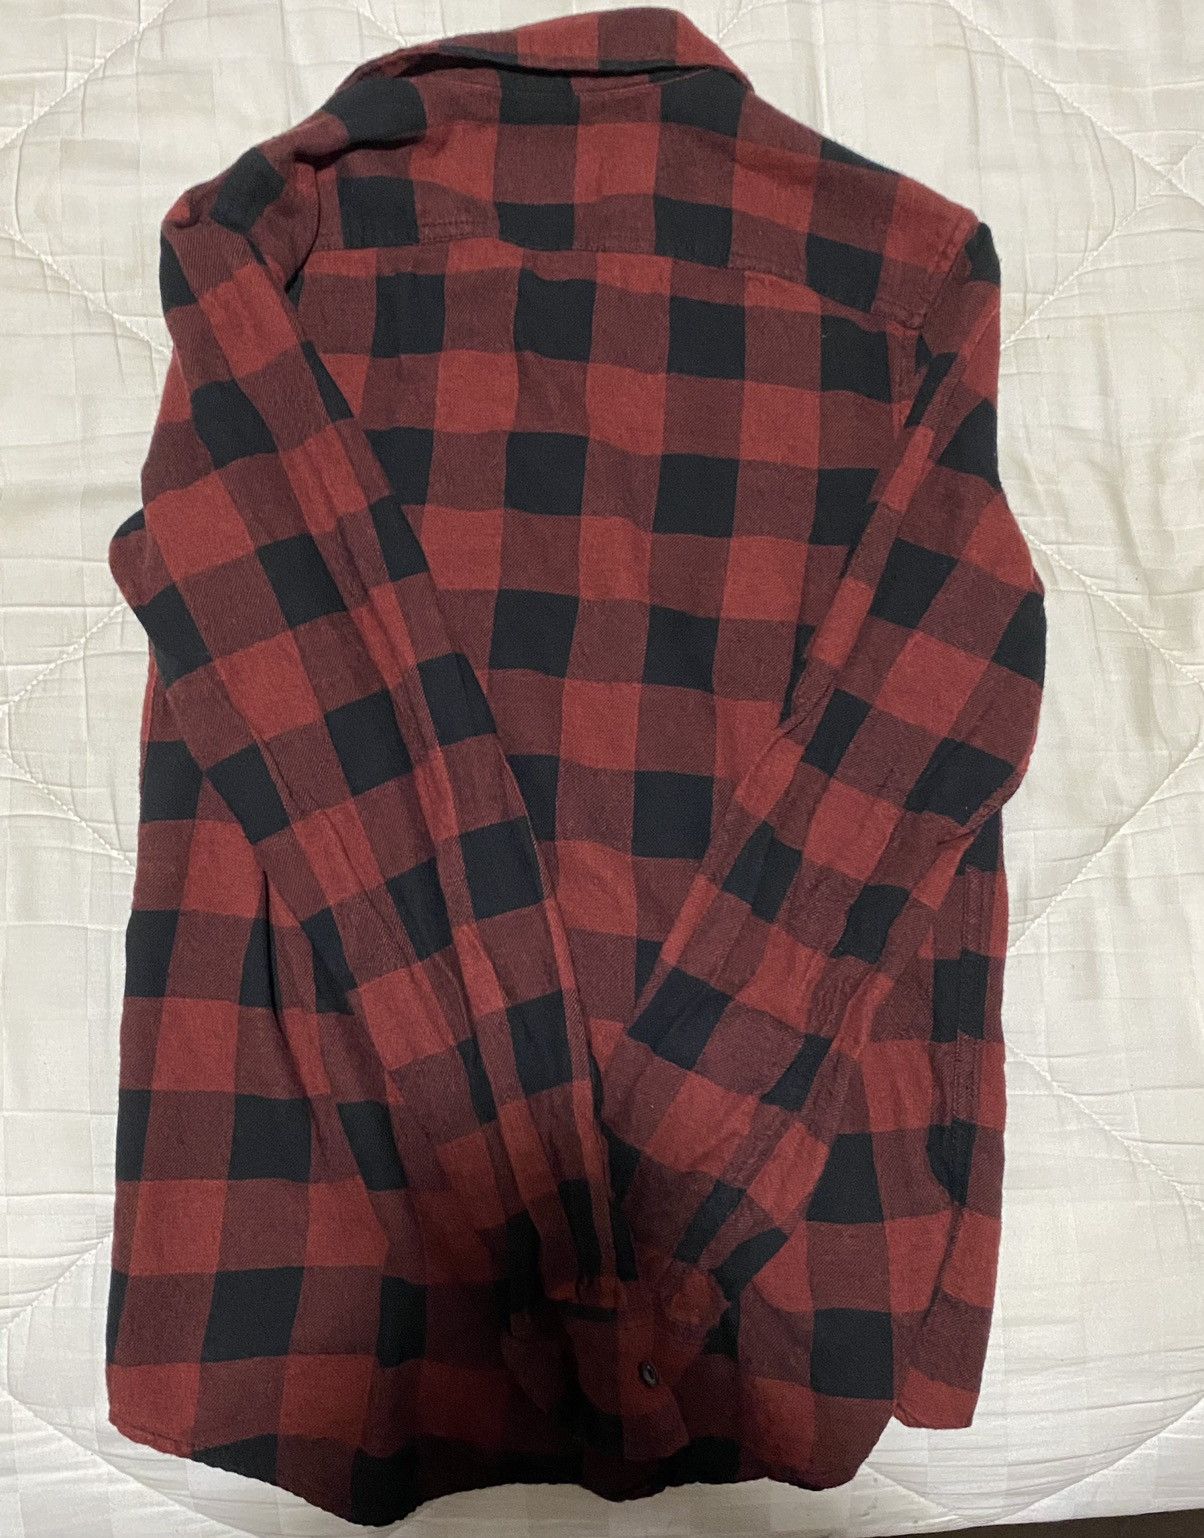 American Rag American Rag Flannel Black and Red Size US S / EU 44-46 / 1 - 3 Thumbnail